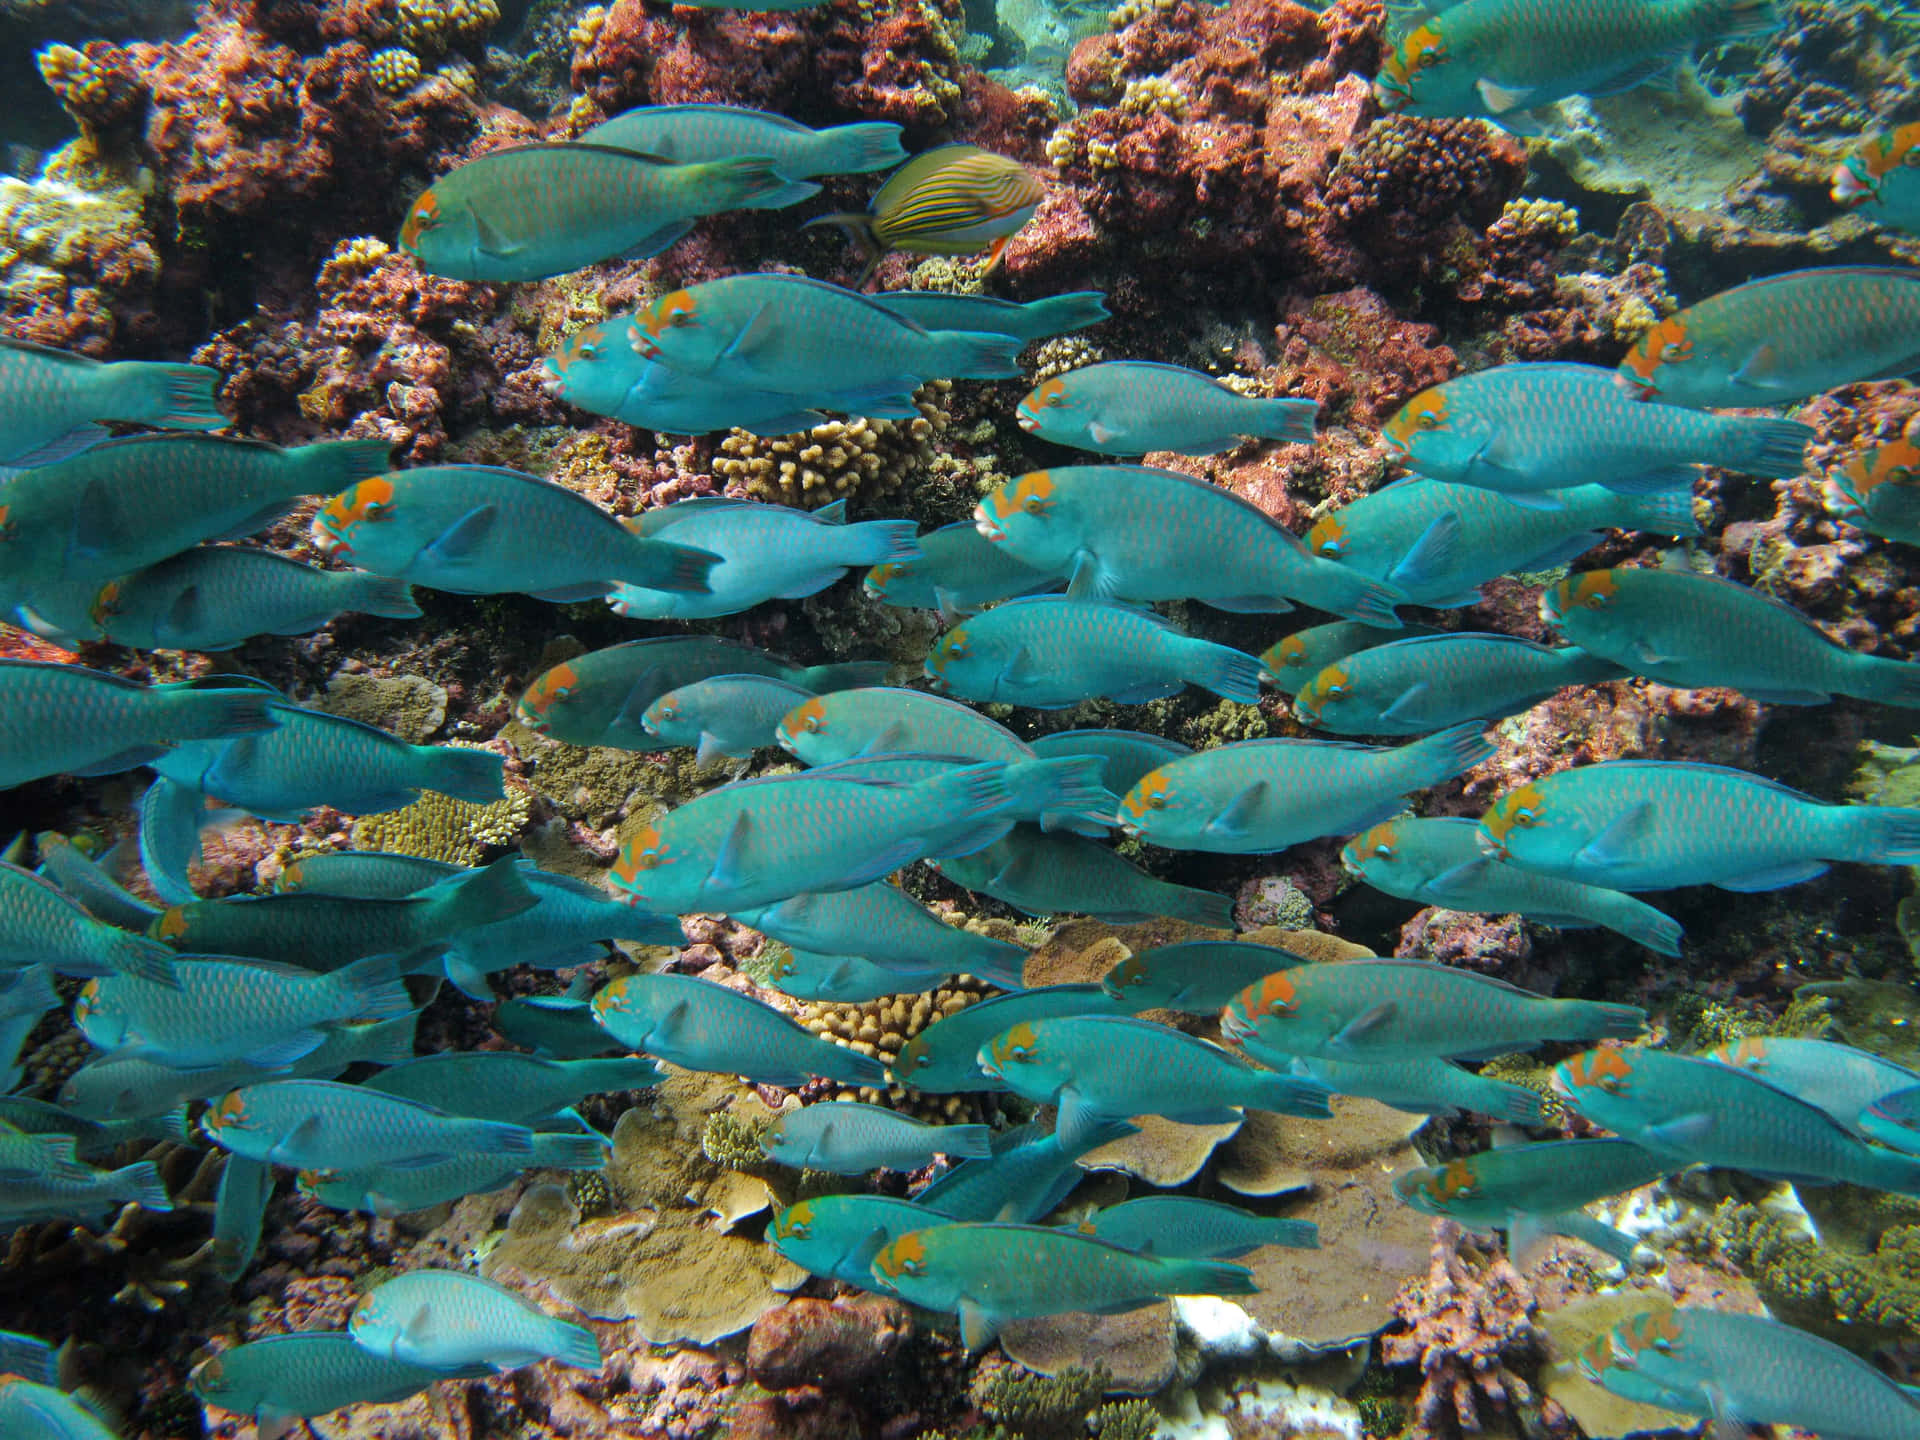 Schoolof Parrotfish Swimming Over Coral Reef Wallpaper